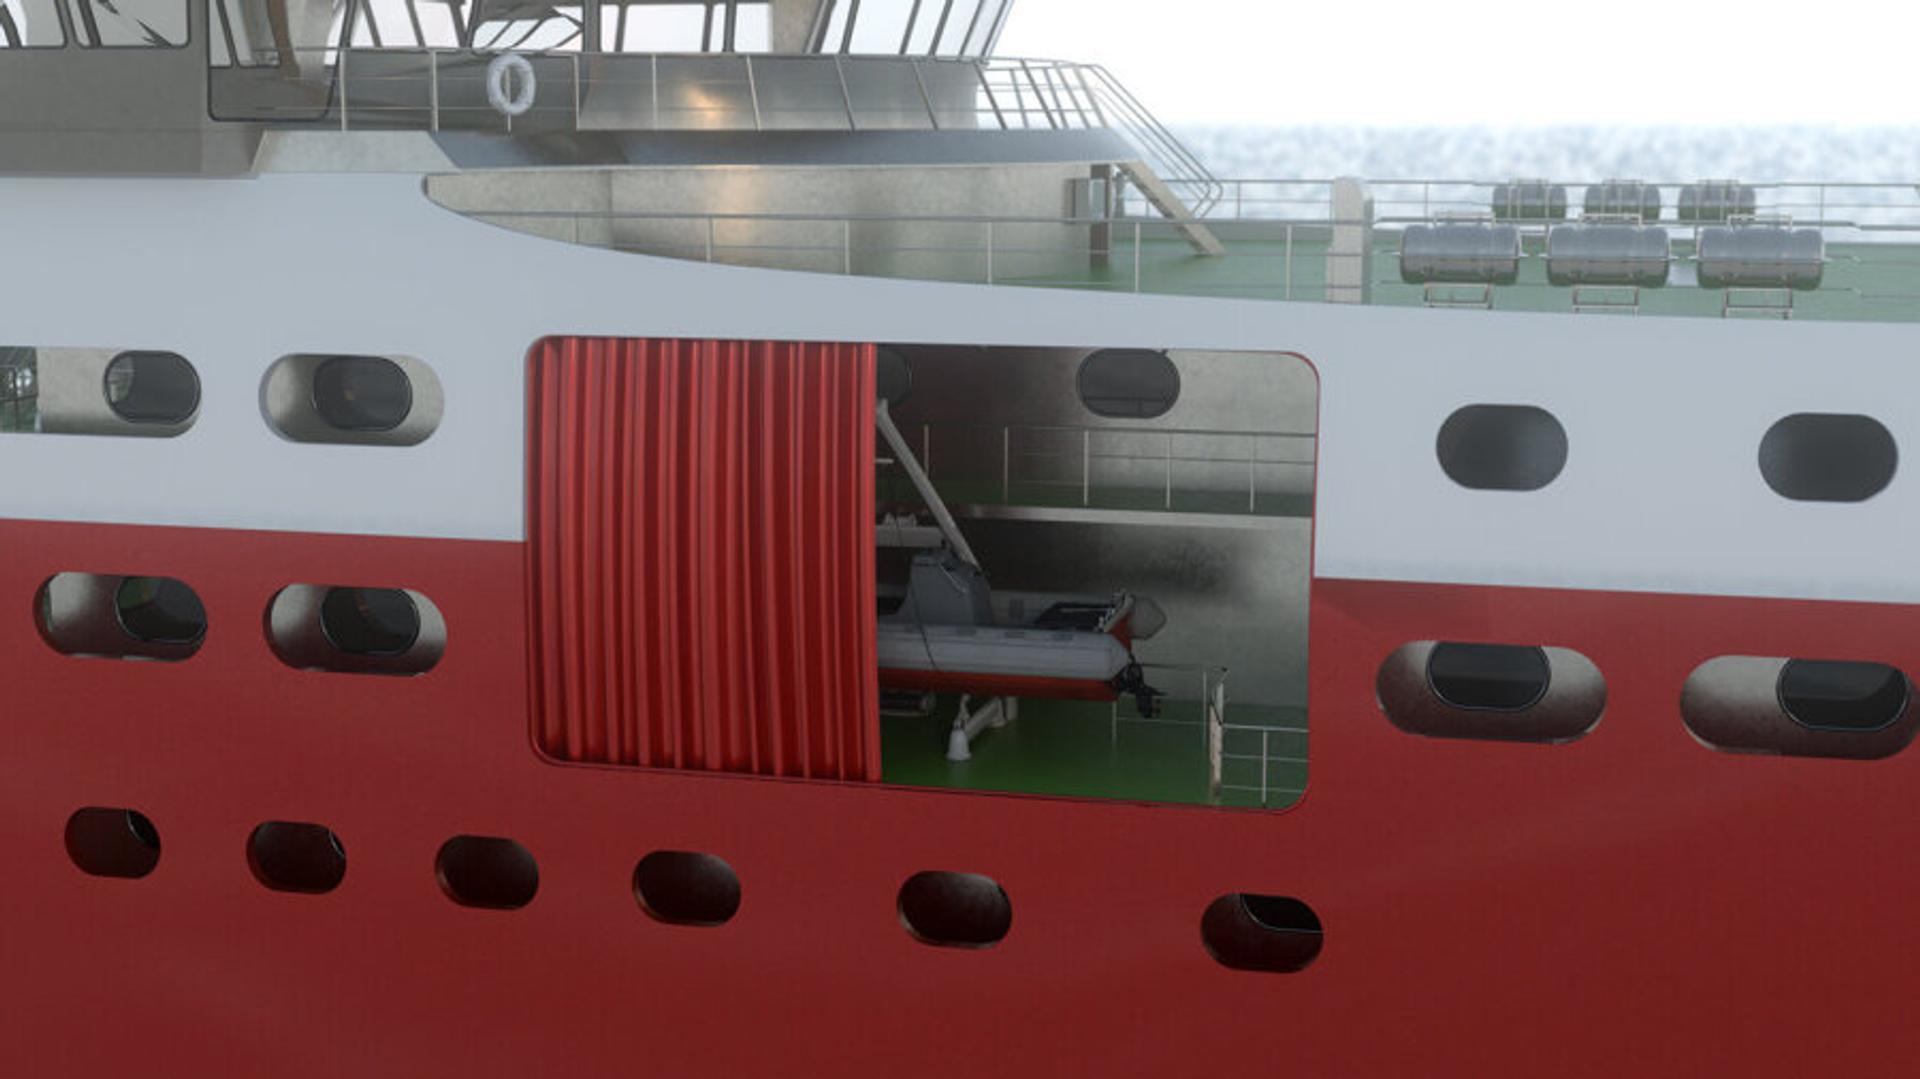 Plany Curtain System a canvas door solution for hangars on ships